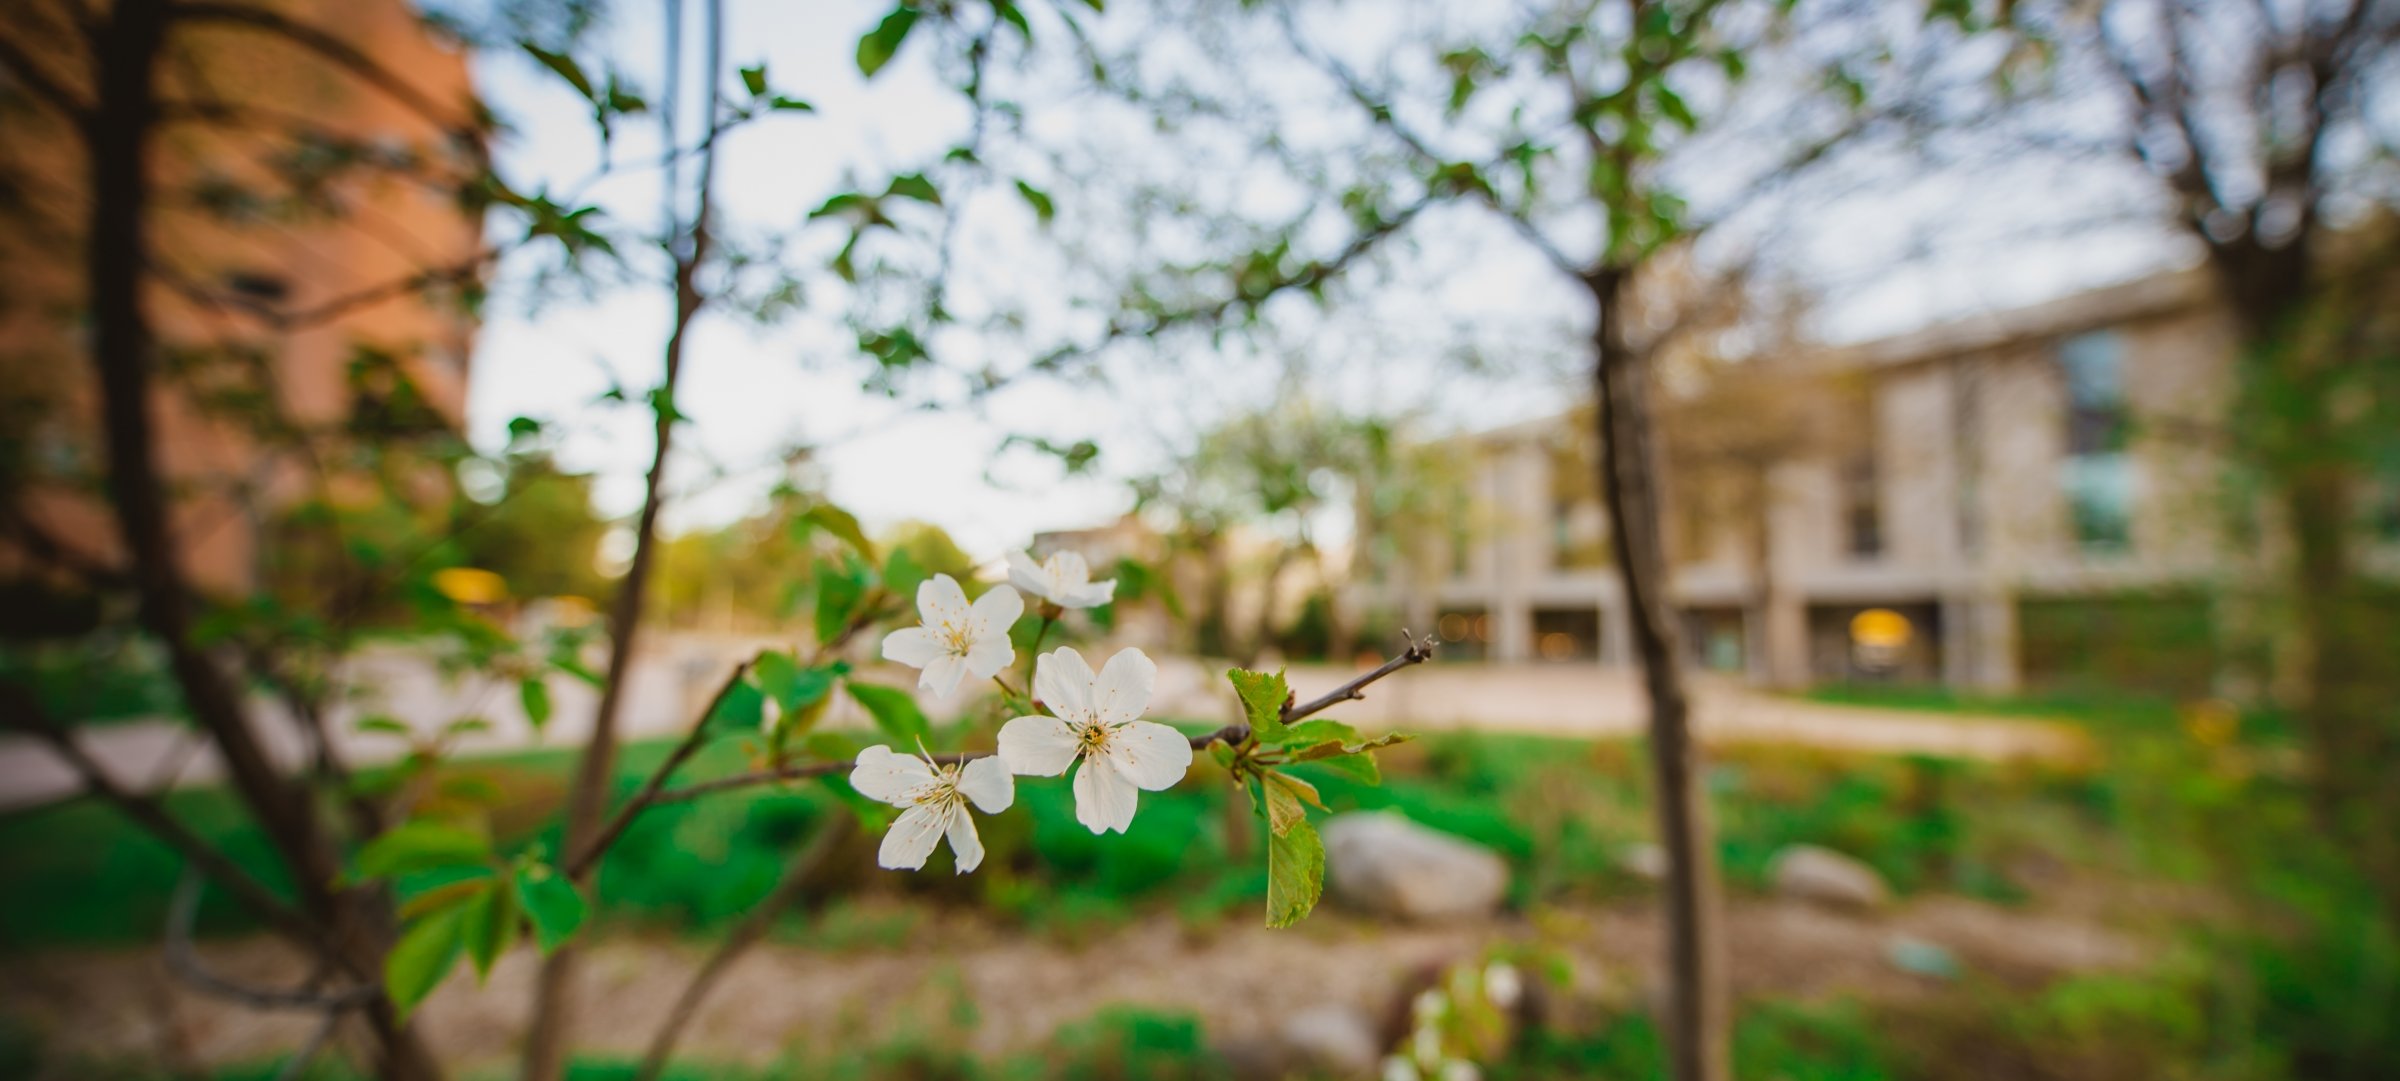 Spring blossom with MTU's campus in the background